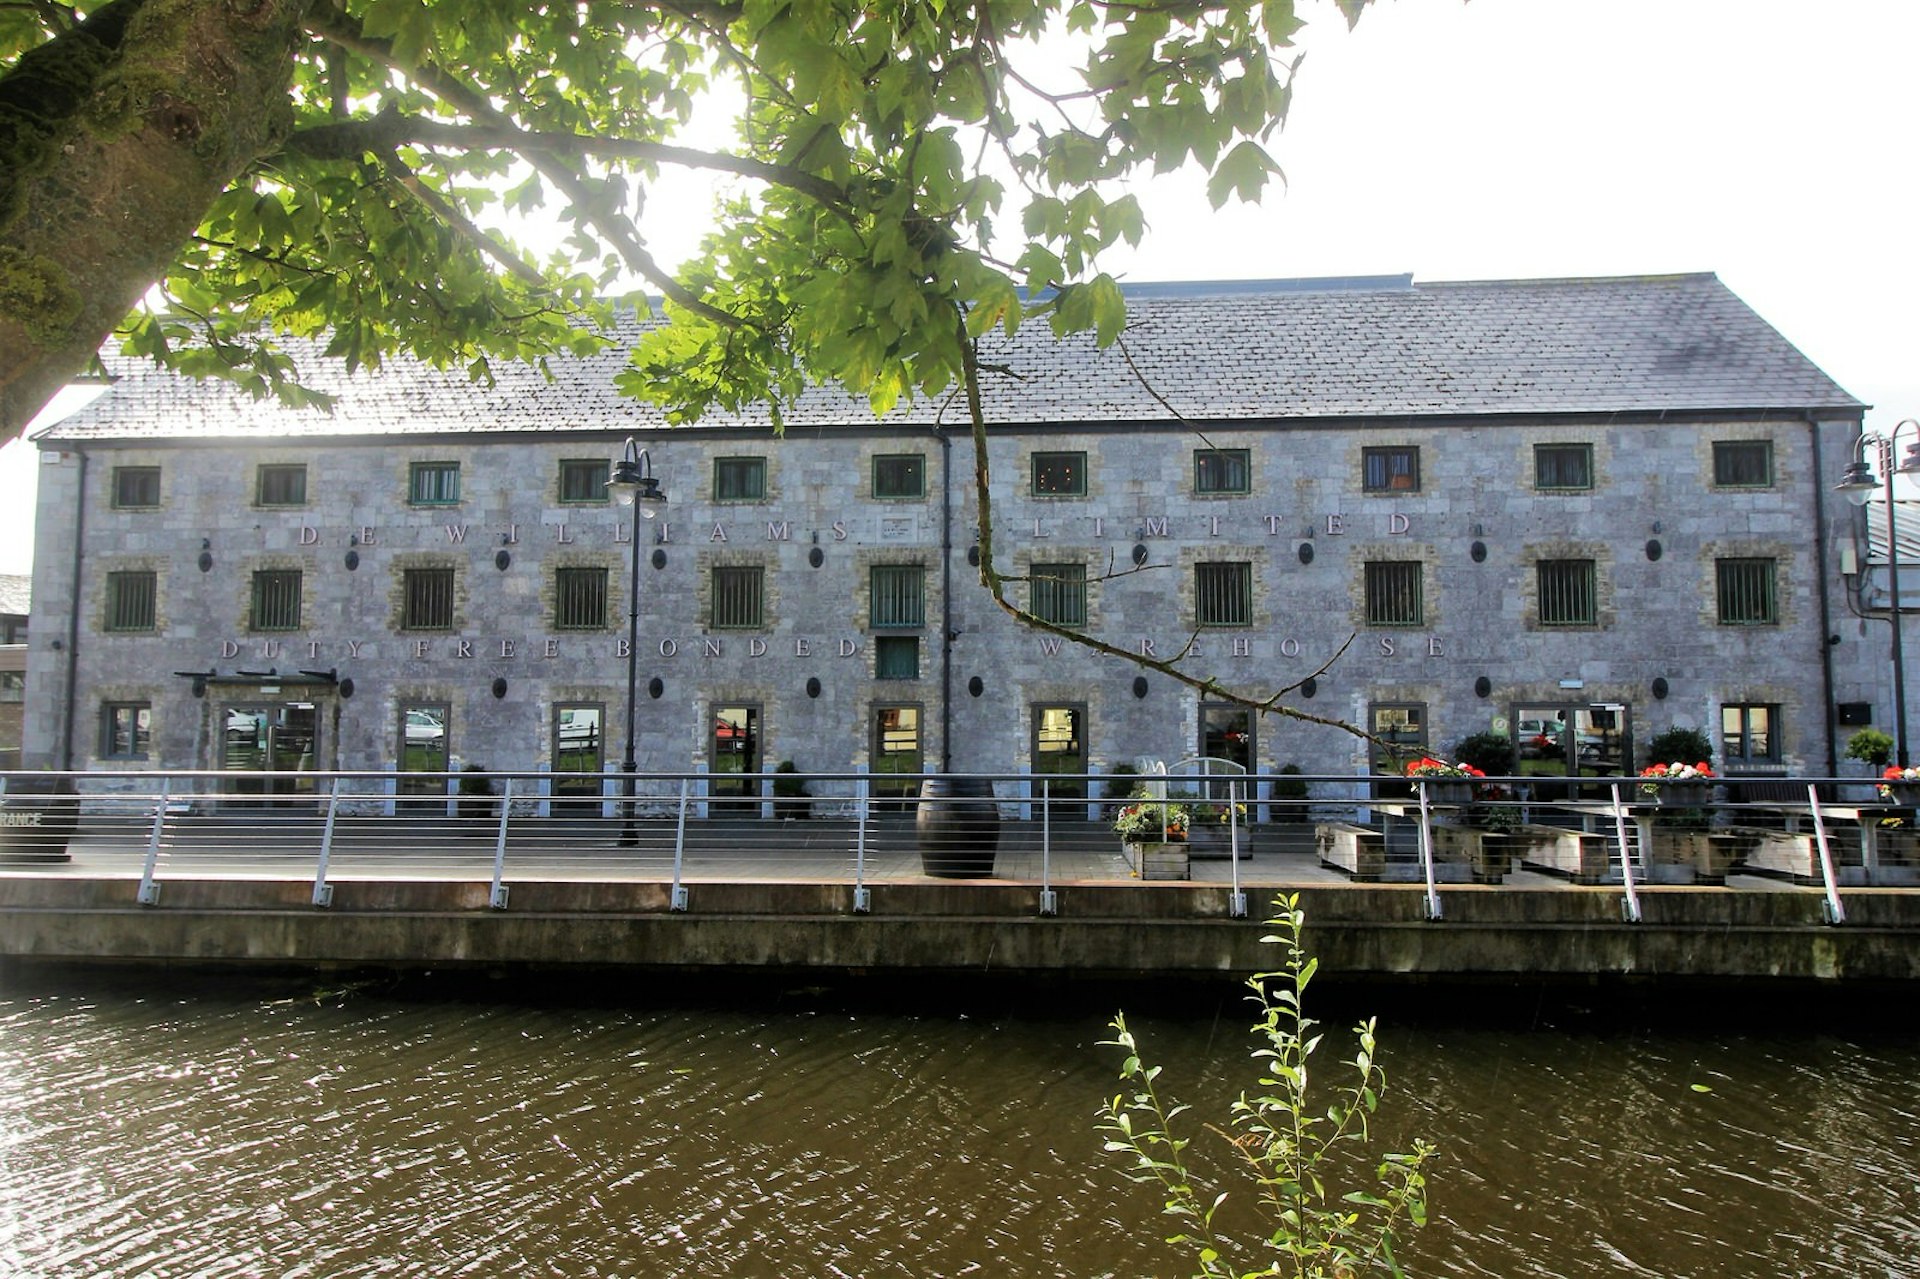 An old warehouse has become home to the Tullamore whiskey tour © Vic O'Sullivan